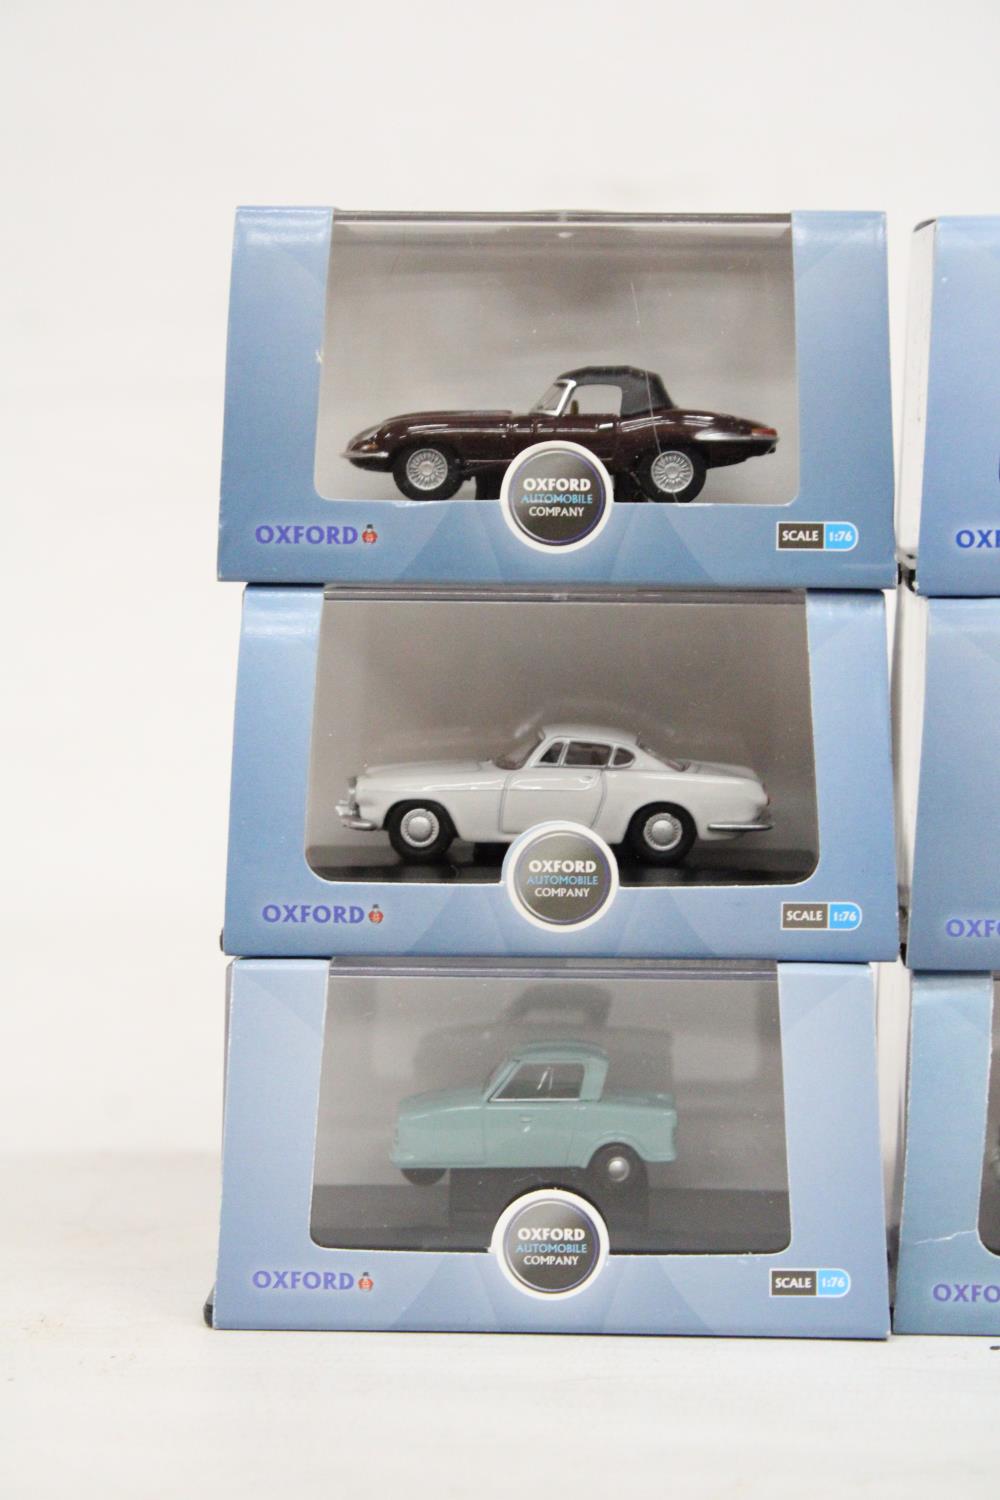 SIX VARIOUS AS NEW AND BOXED OXFORD AUTOMOBILE COMPANY VEHICLES - Image 2 of 6